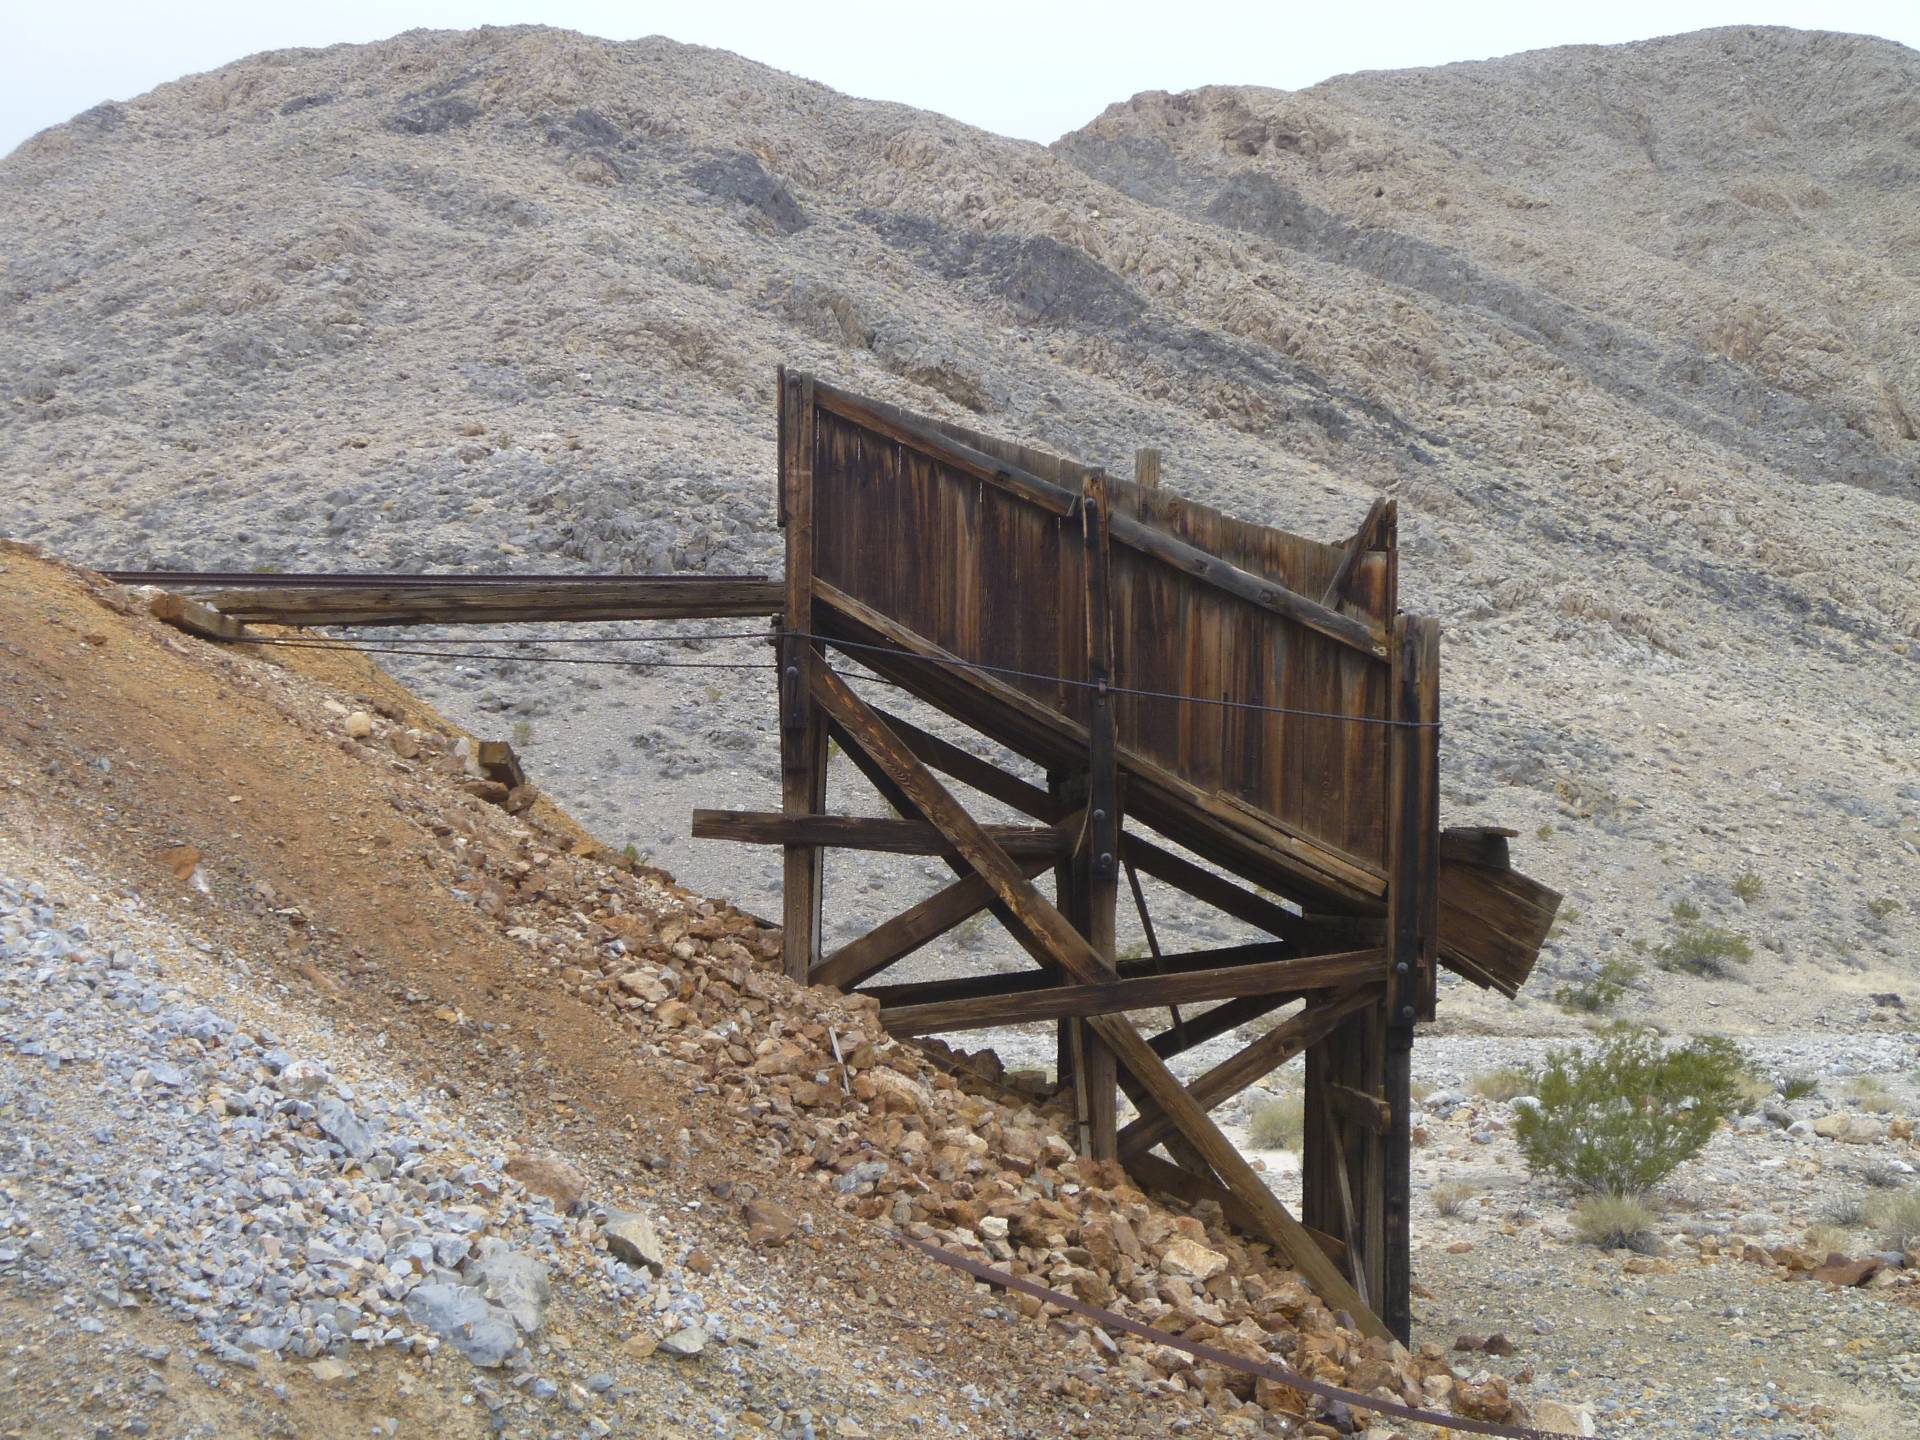 Ore bin at the Ubehebe Lead Mine, Death Valley National Park, California